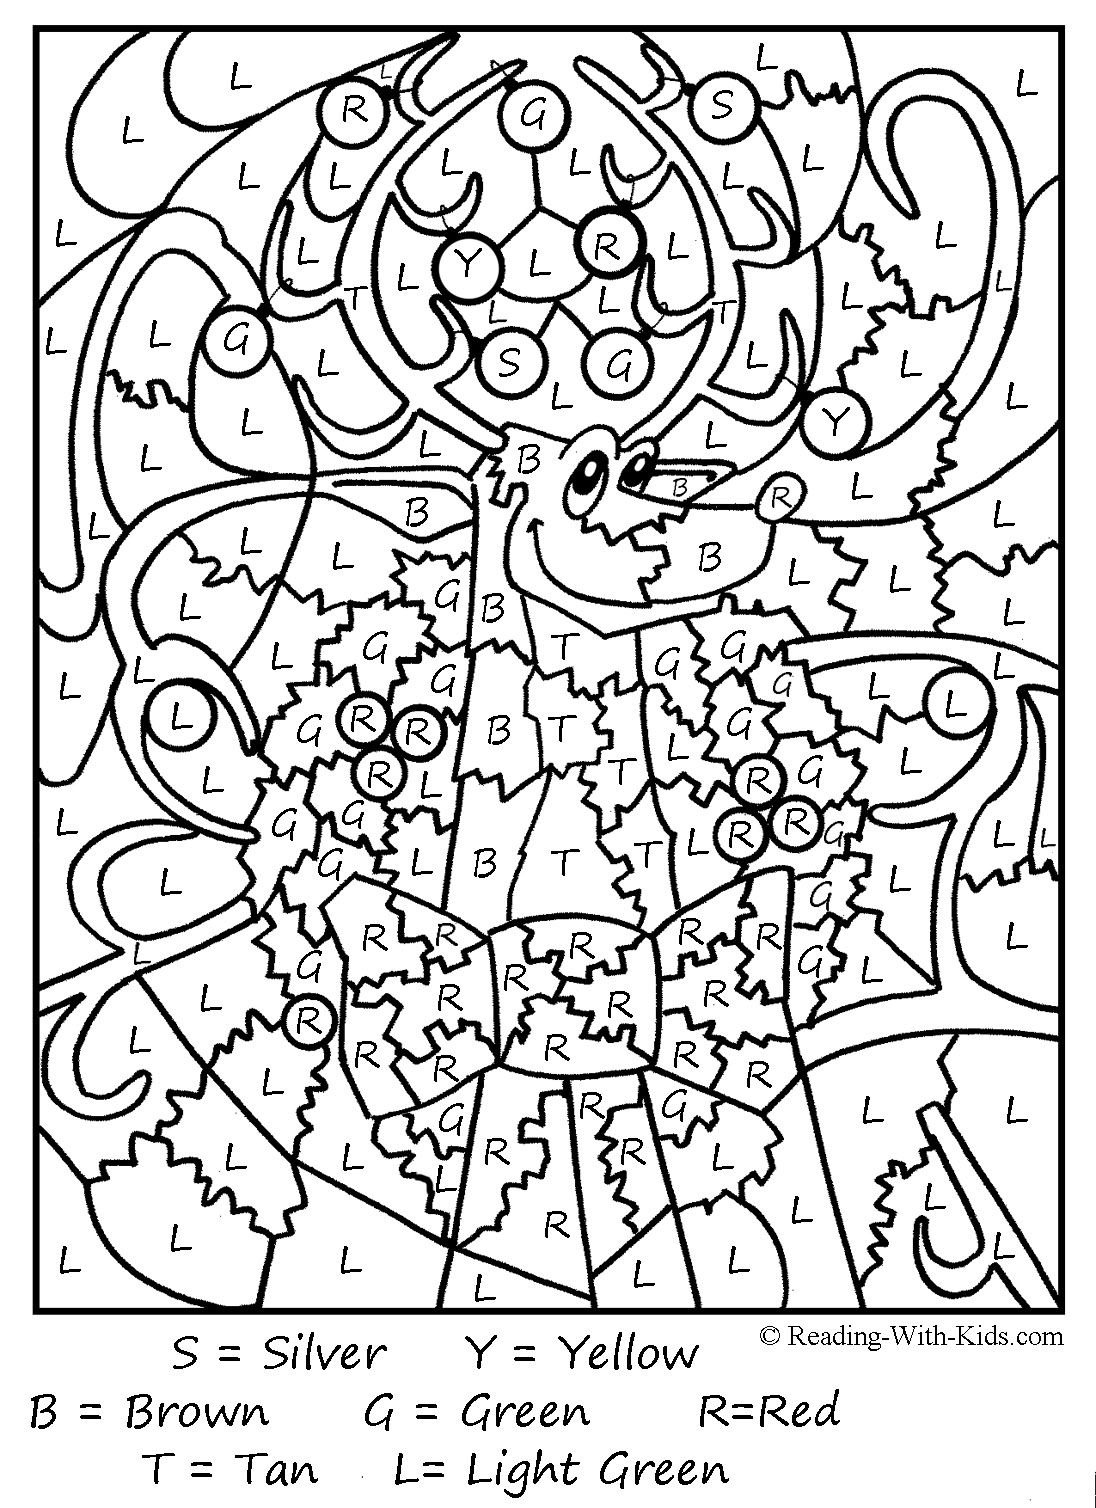 Hard christmas coloring pages printable for free download